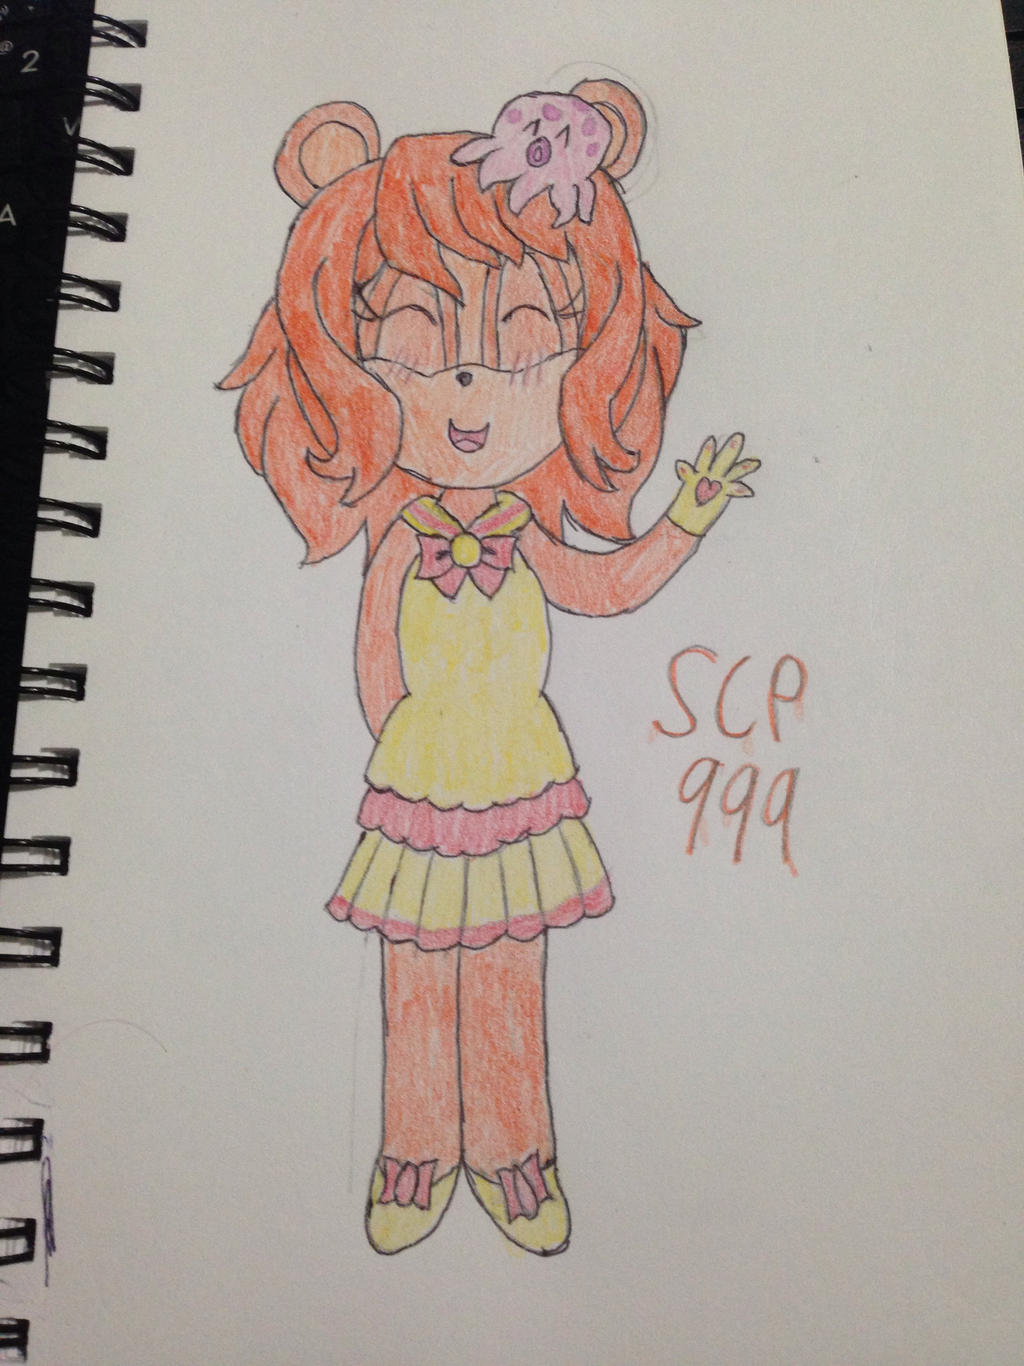 SCP-999 is an adorable bby by CraftUniKitty101 on DeviantArt